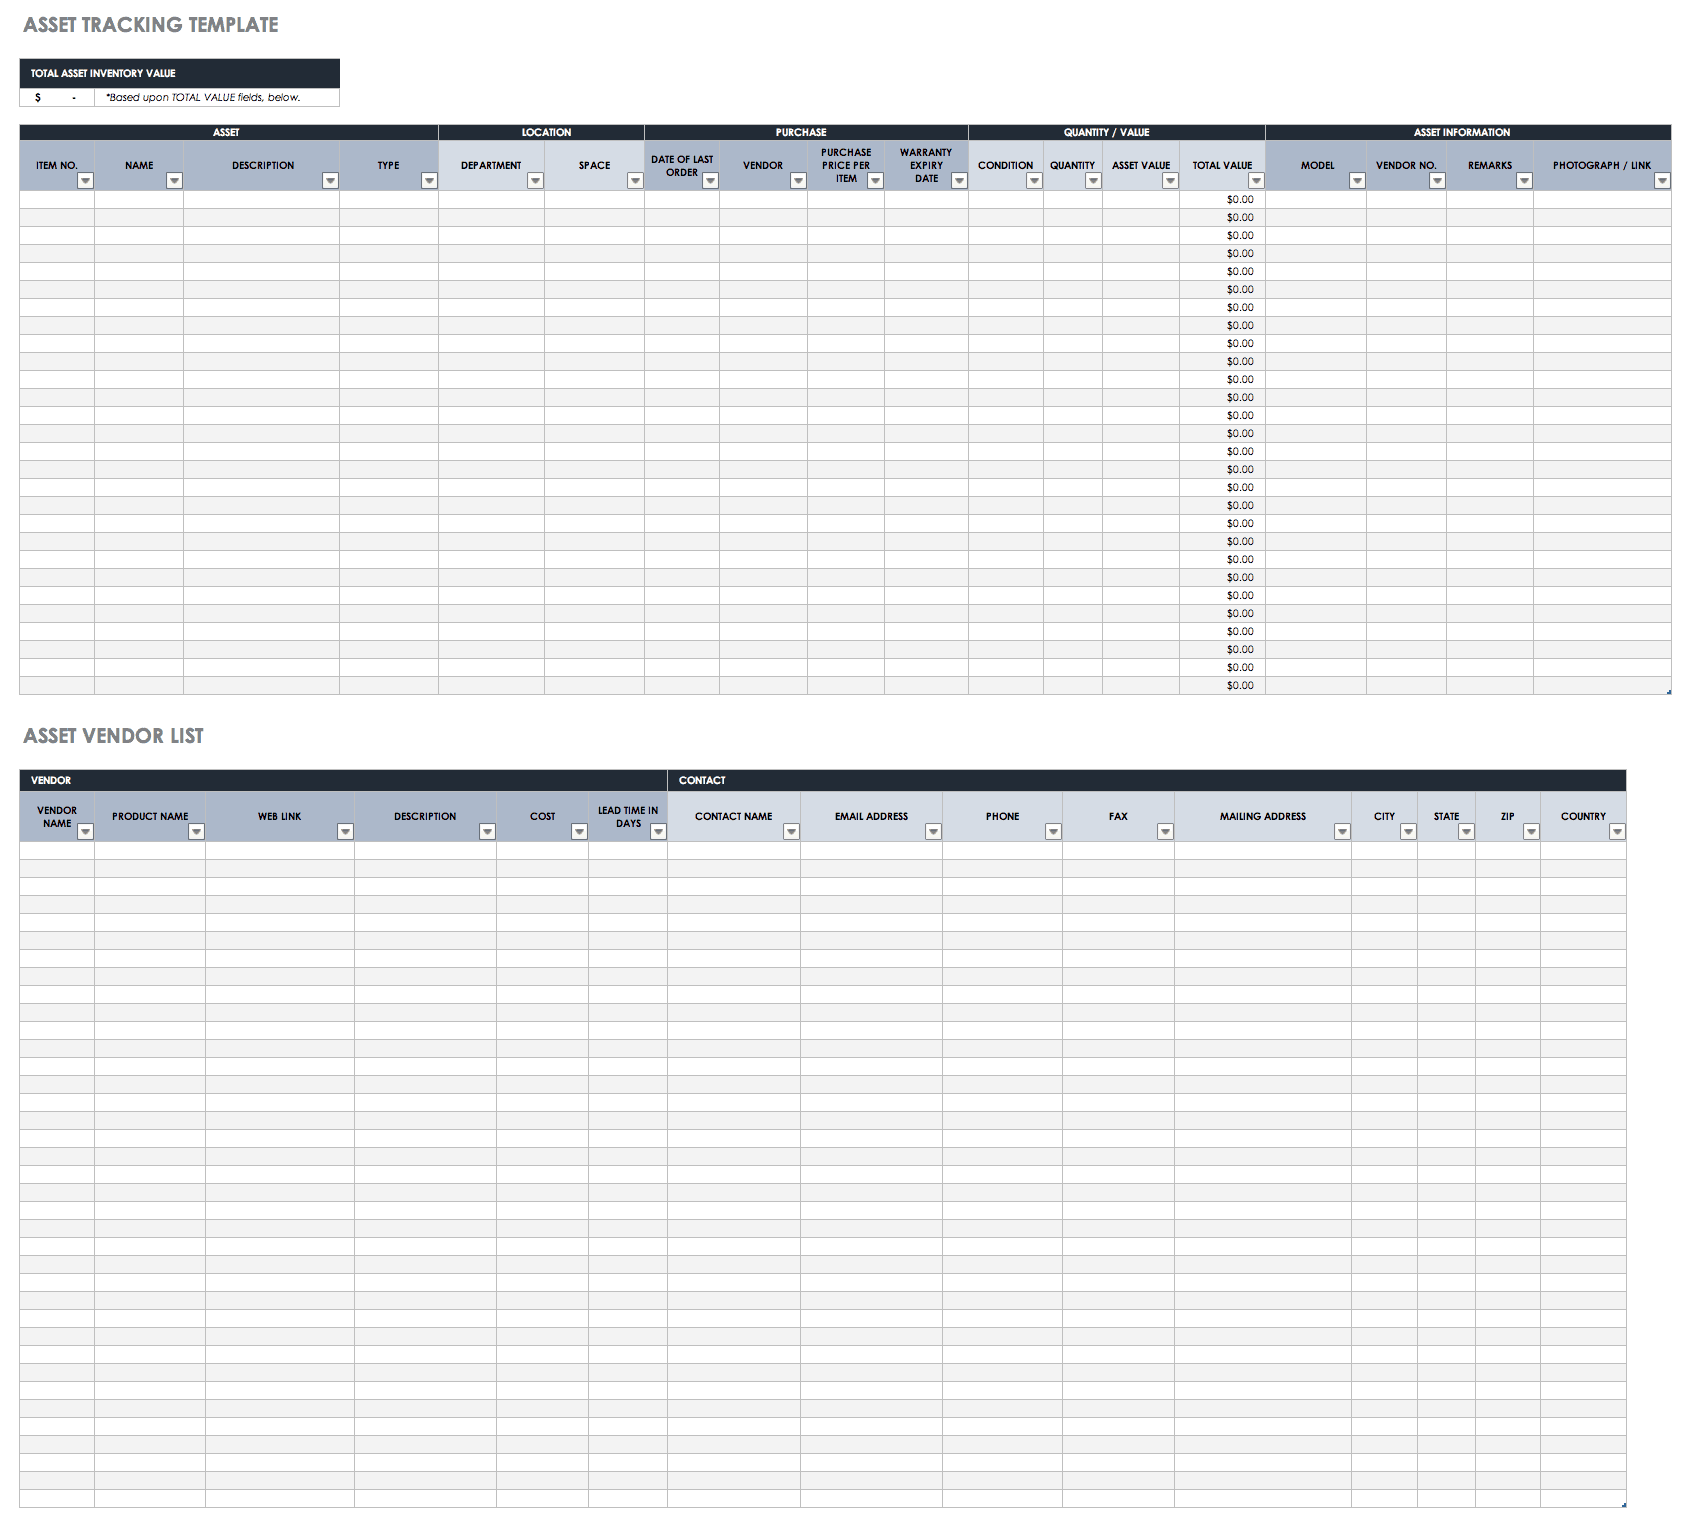 Stock Inventory Template from www.smartsheet.com